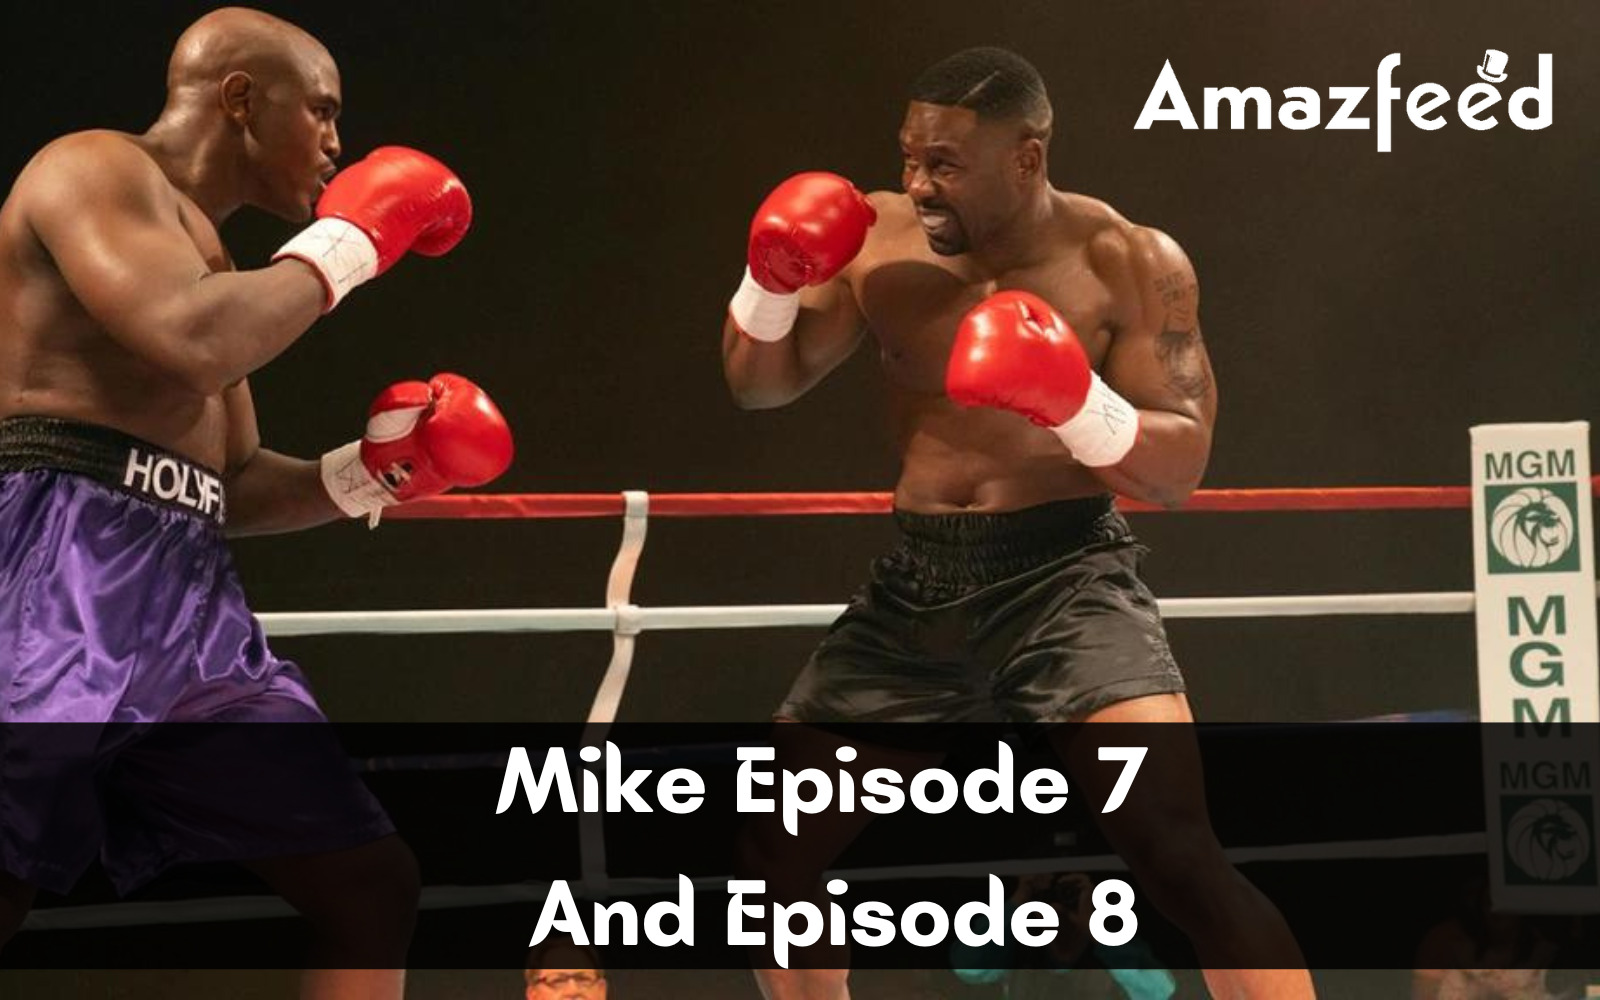 Mike Episode 7 released date